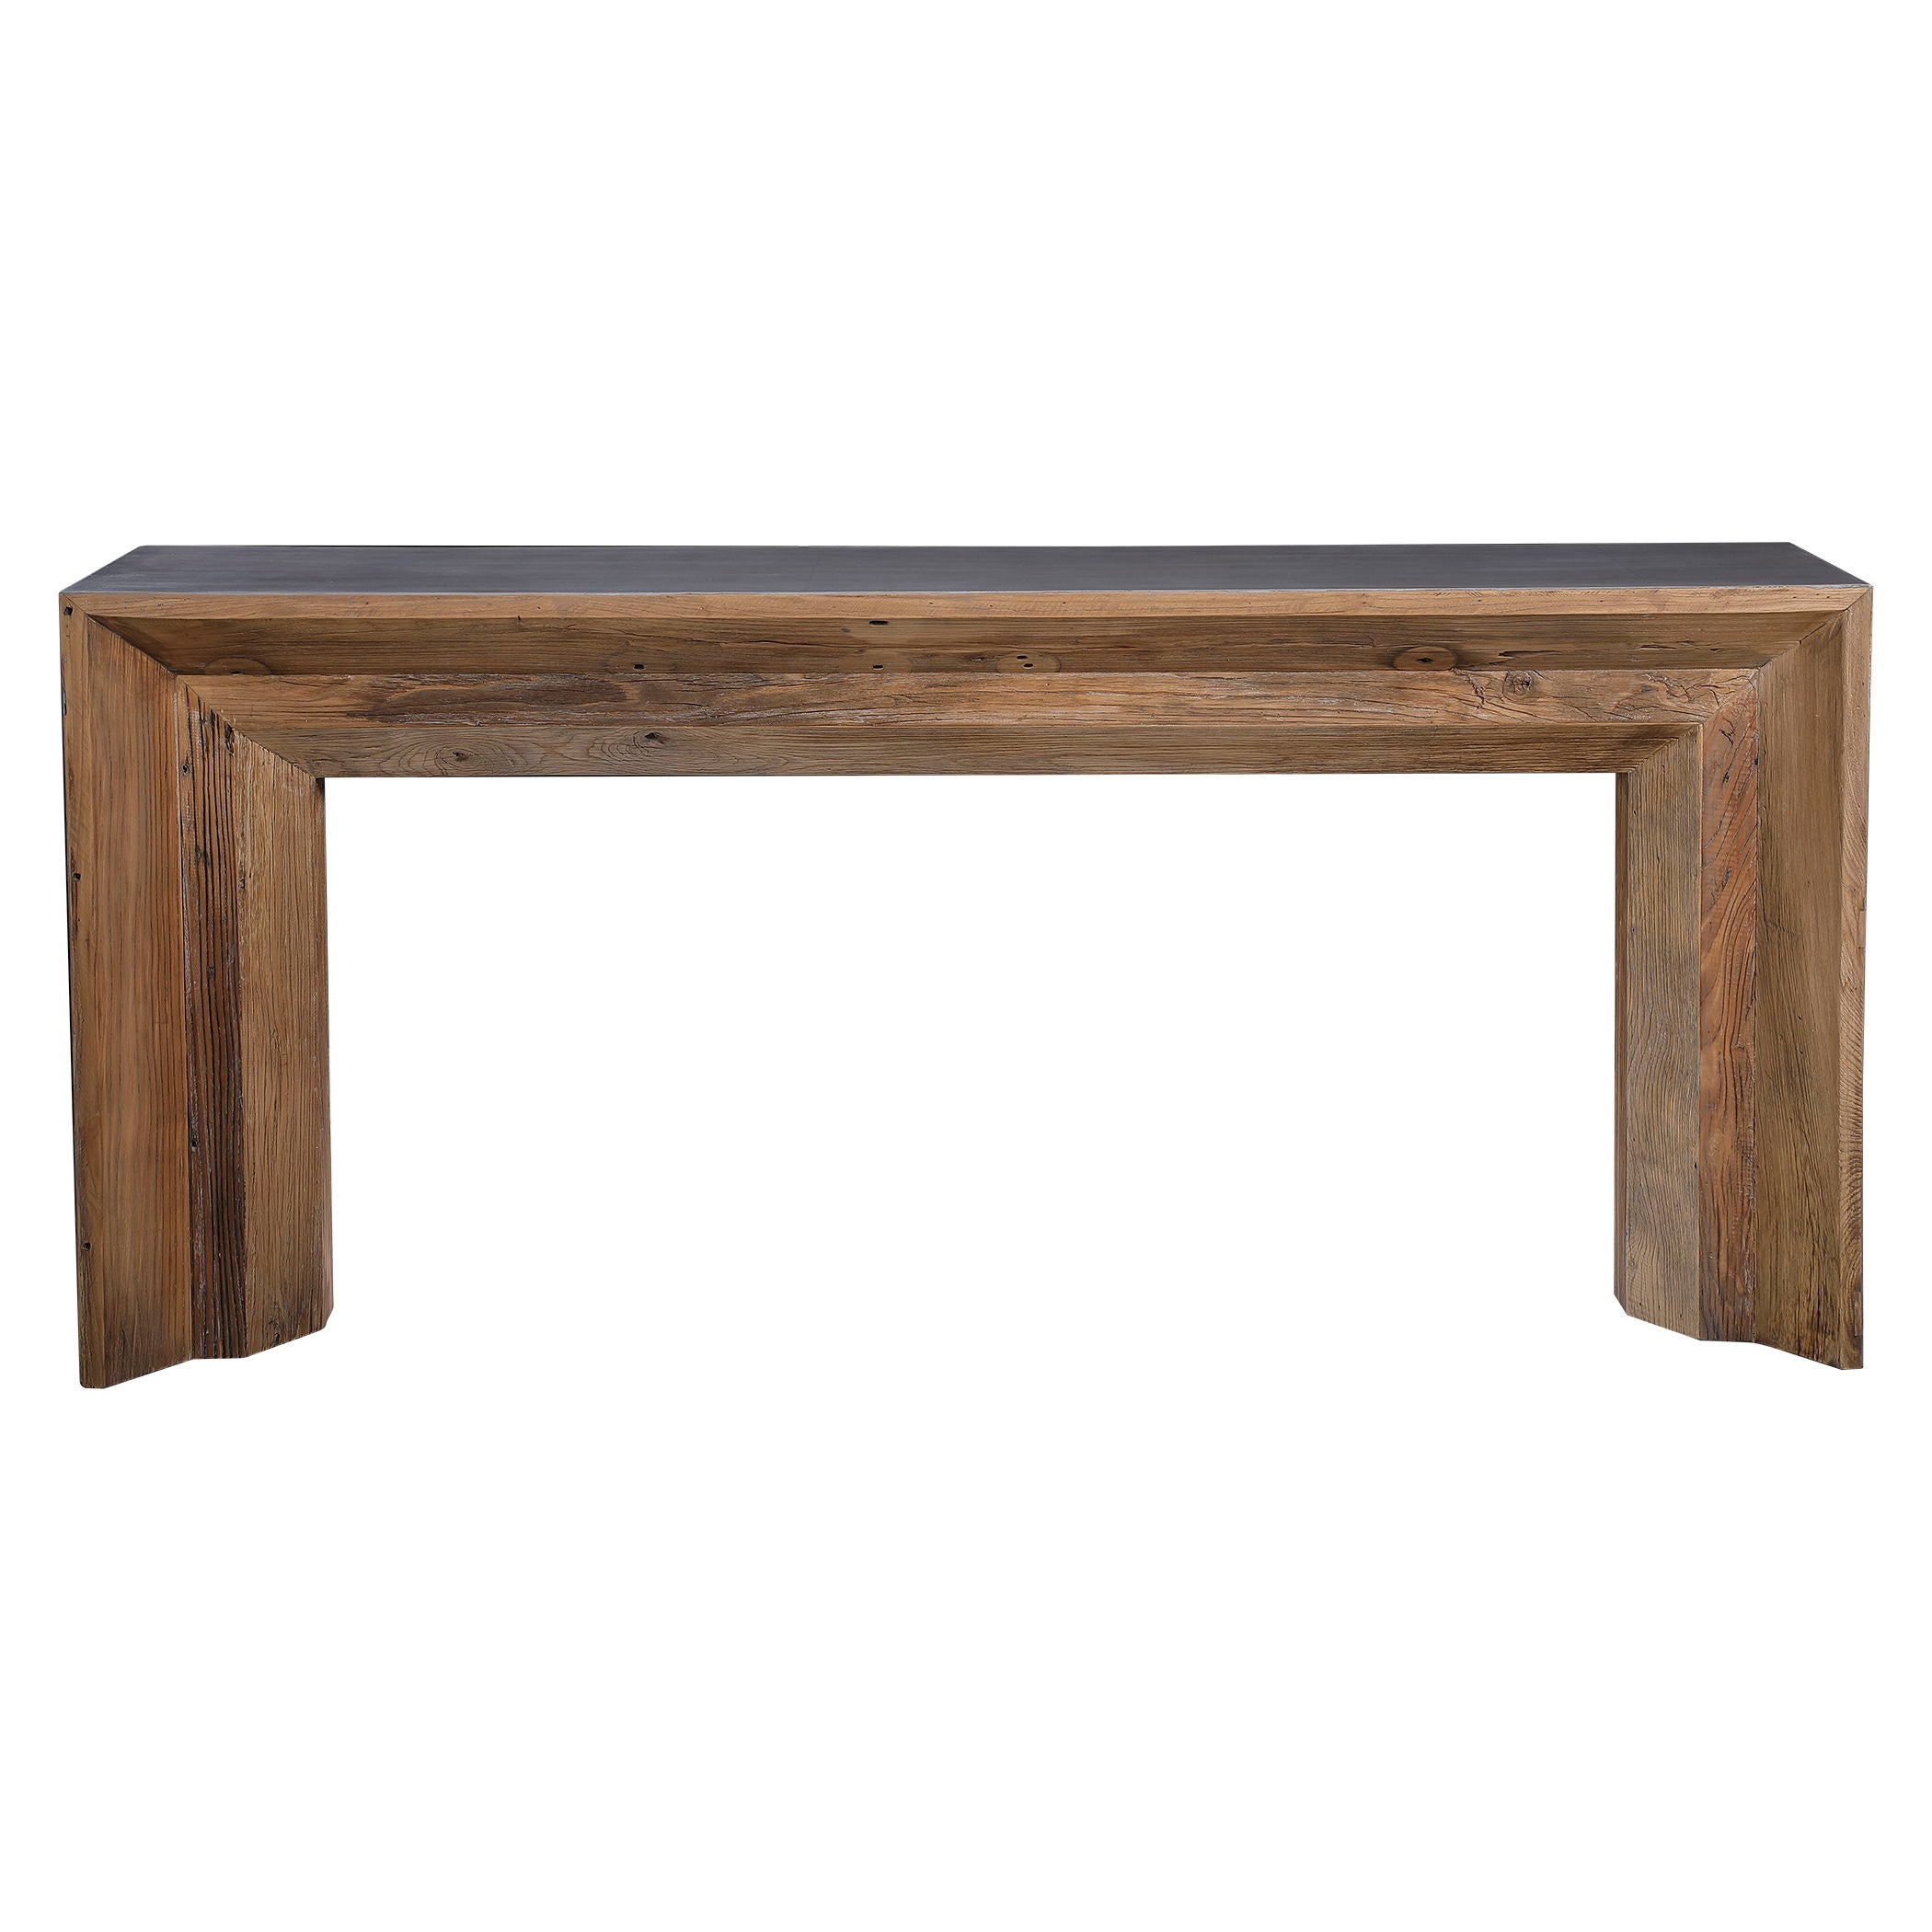 Vail - Reclaimed Wood Console Table - Dark Brown